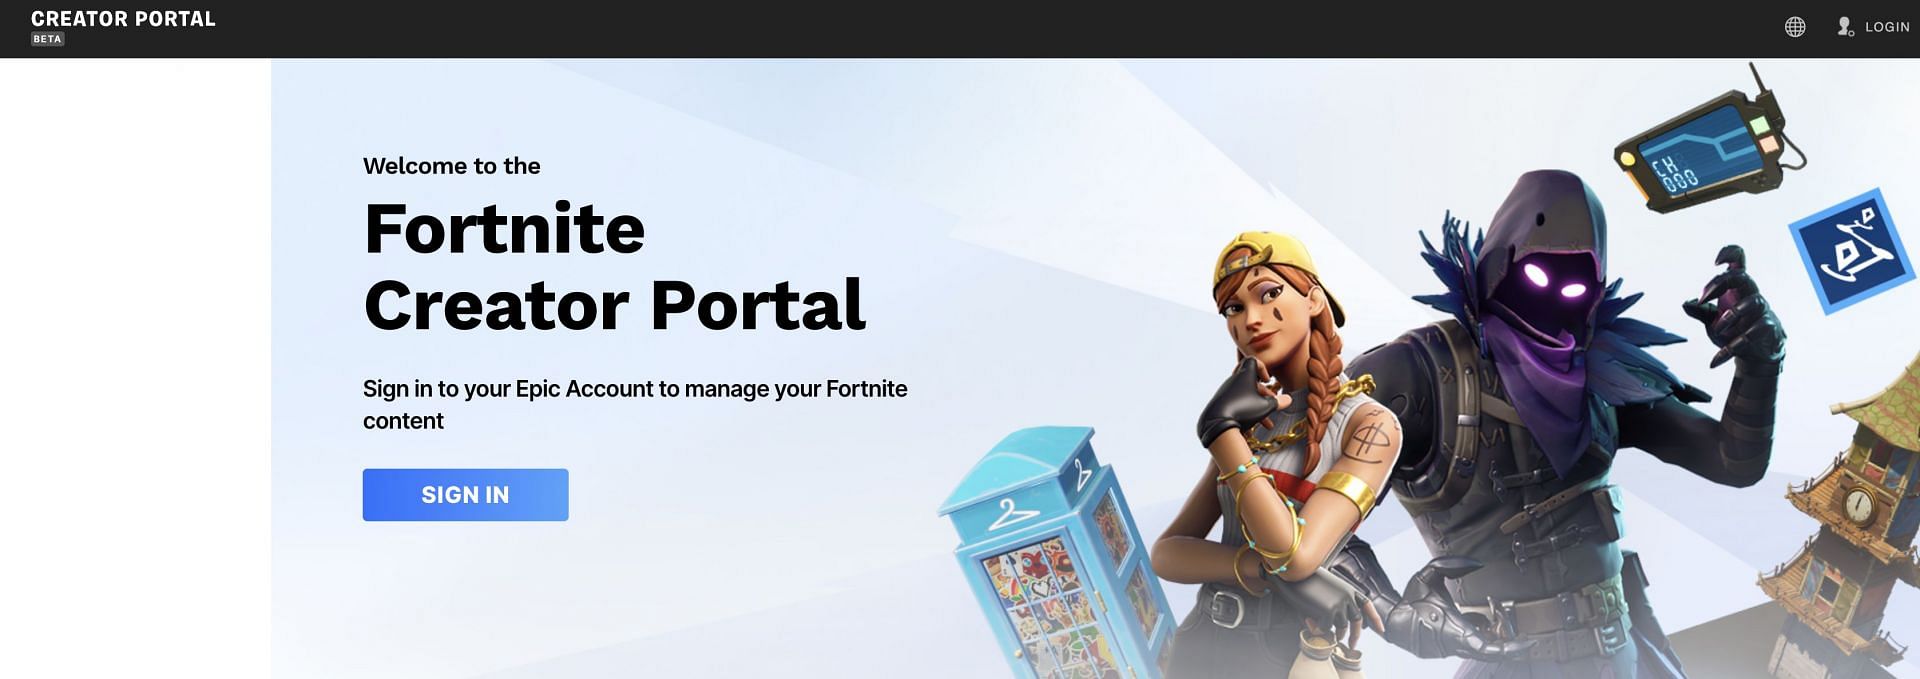 Creator Pages Now Available on Fortnite.com